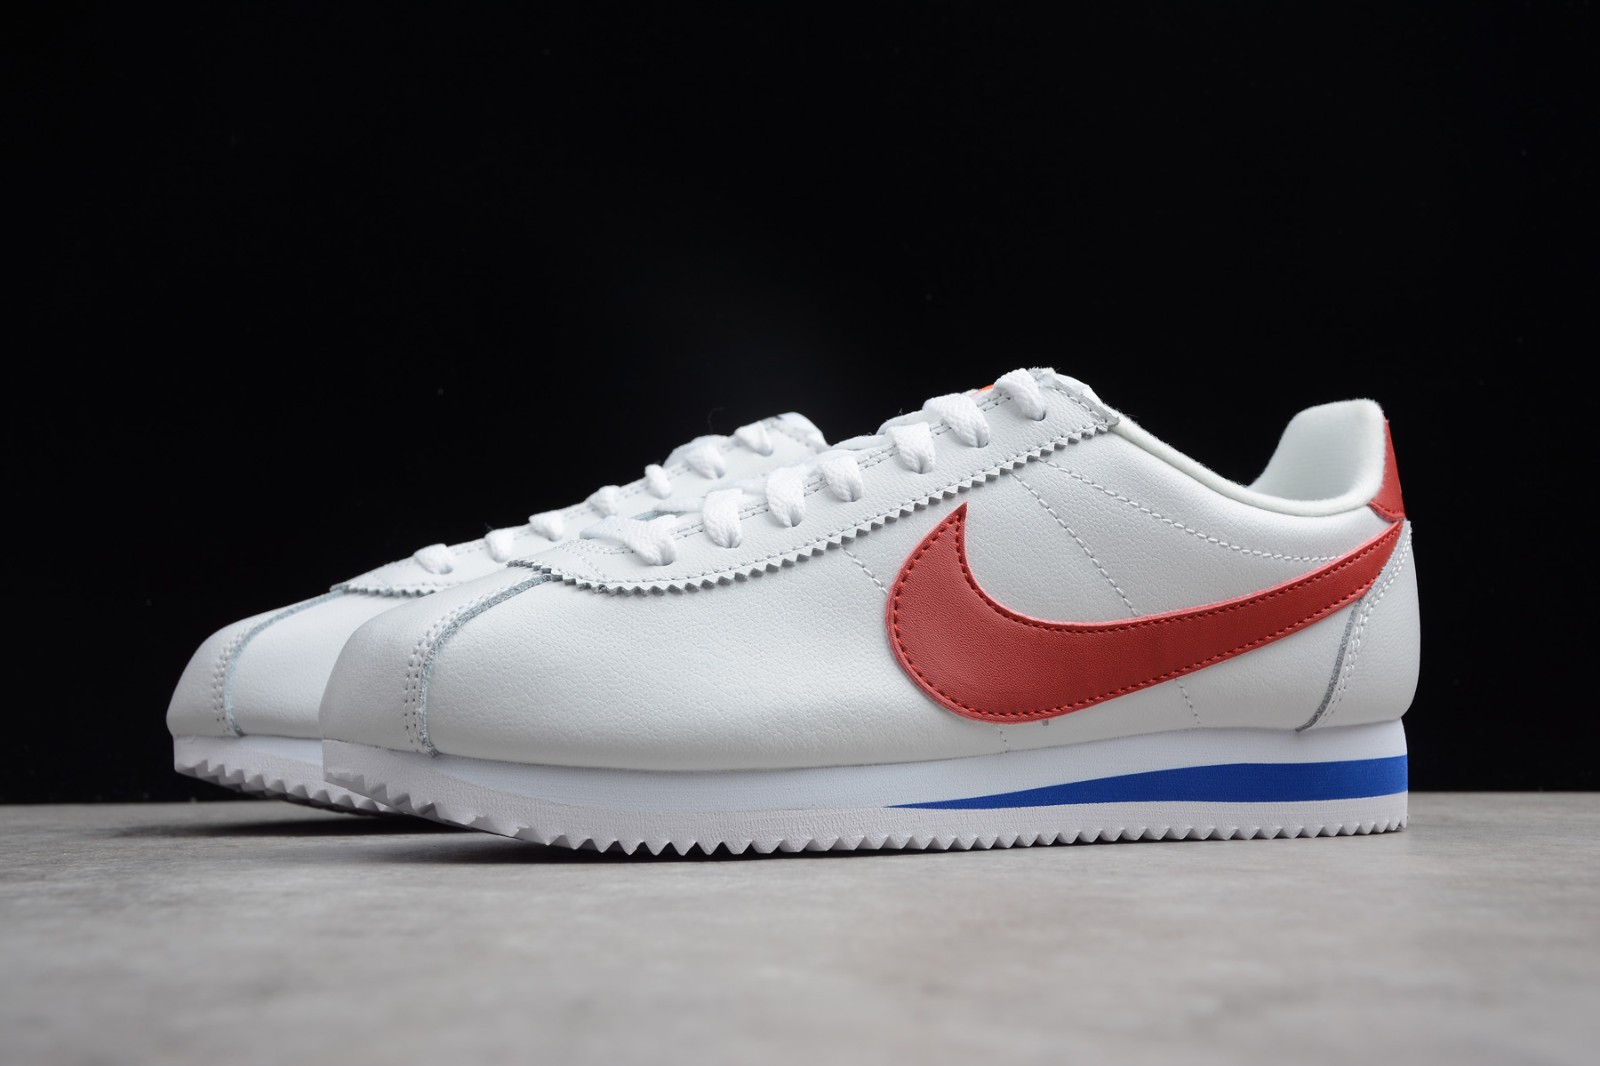 drinken Willen Soms mens nike sneakers with silver swoosh blue hair - Nike Classic Cortez SE  Forrest Gump White Varsity Red Varsity Royal 902801 100 -  MultiscaleconsultingShops